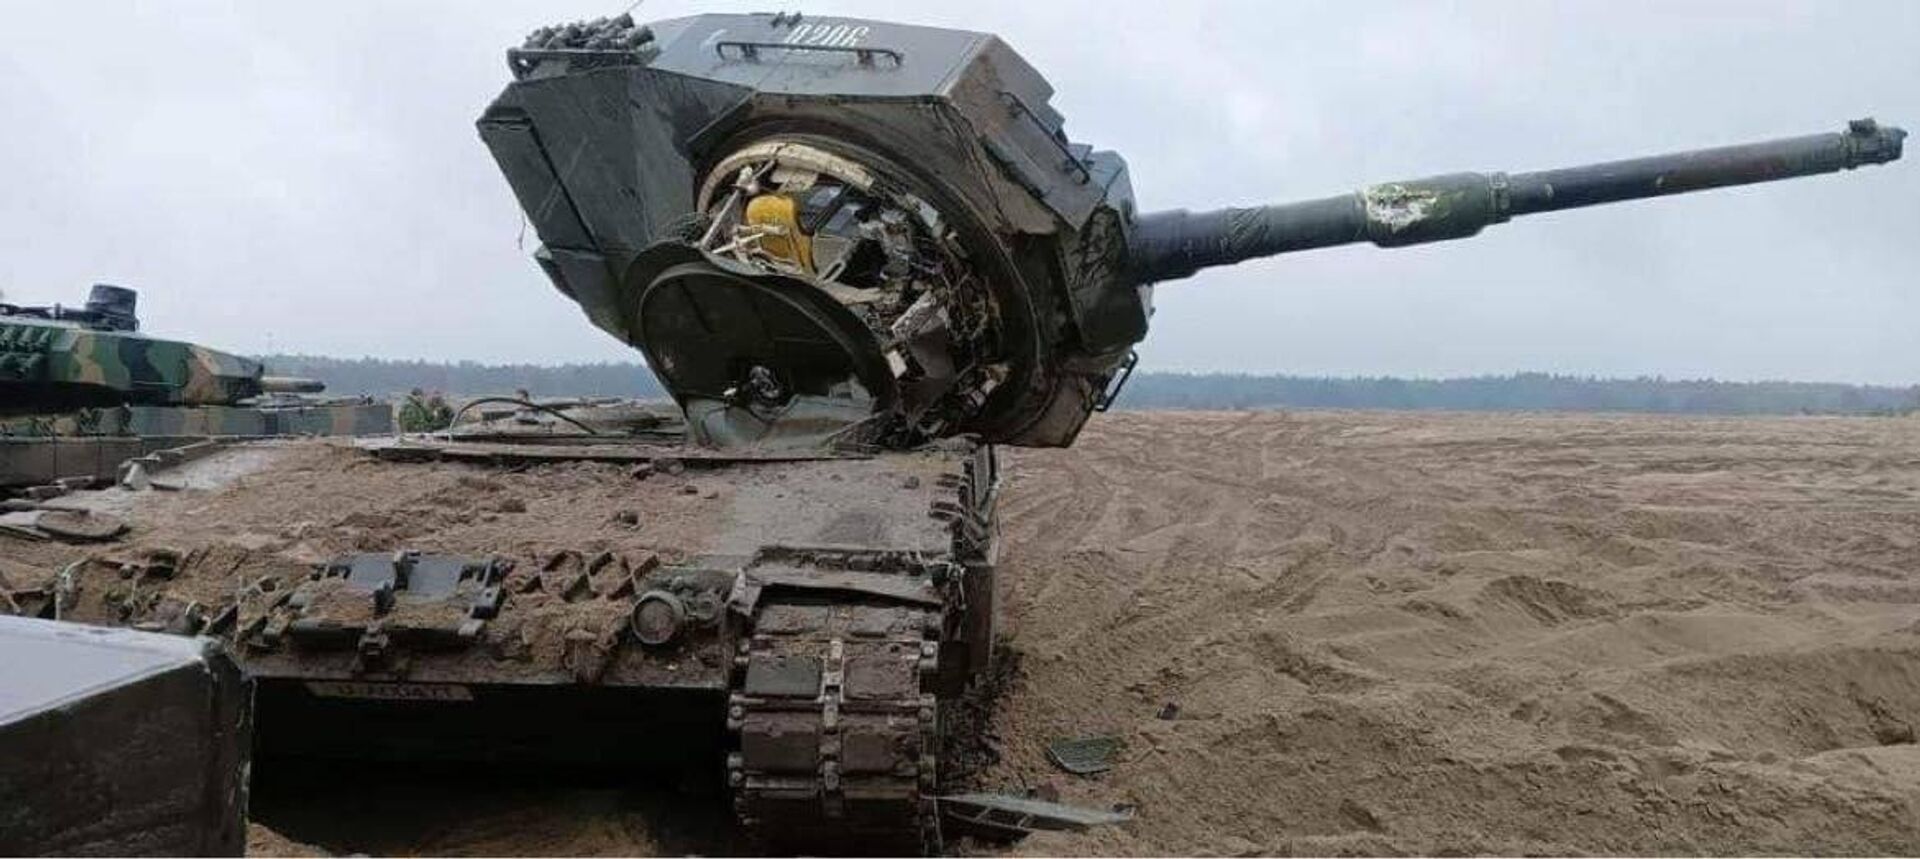 Leopard 2 with its turret ripped off after an accident during training by Ukrainian tankers in western Poland.  - Sputnik International, 1920, 18.04.2023